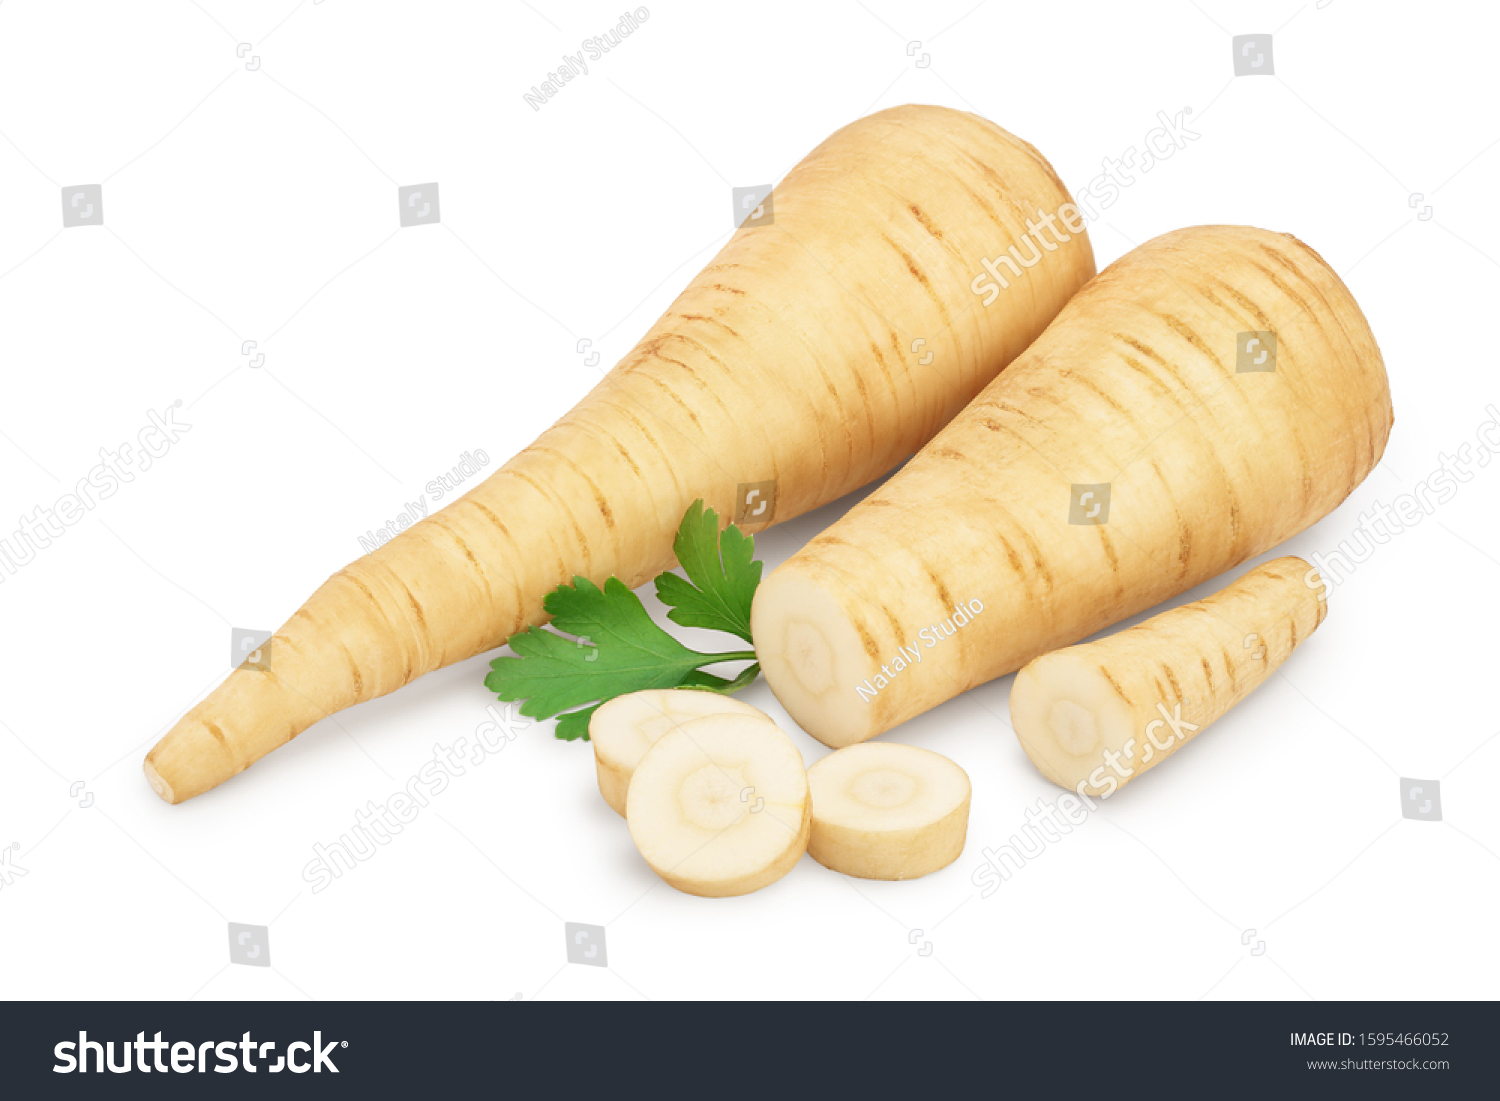 Parsnip root and slices with parsley isolated on white background with clipping path #1595466052